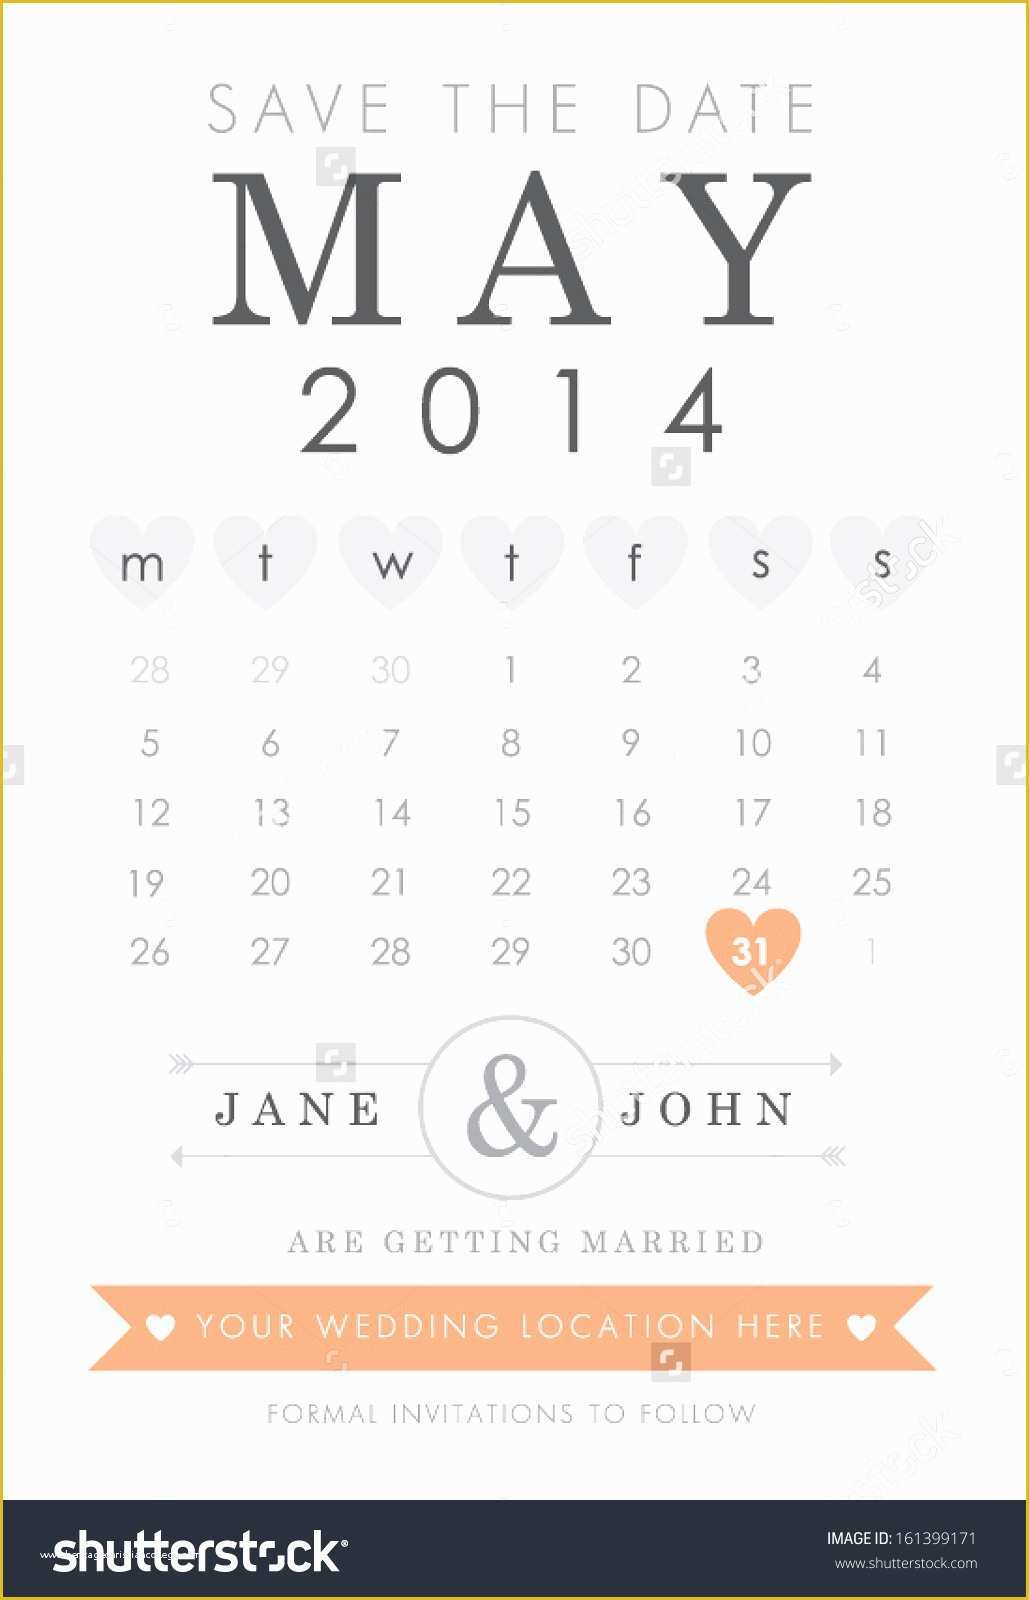 Free Printable Save the Date Templates Of Save the Date Calendar Template 2018 Calendar Save the